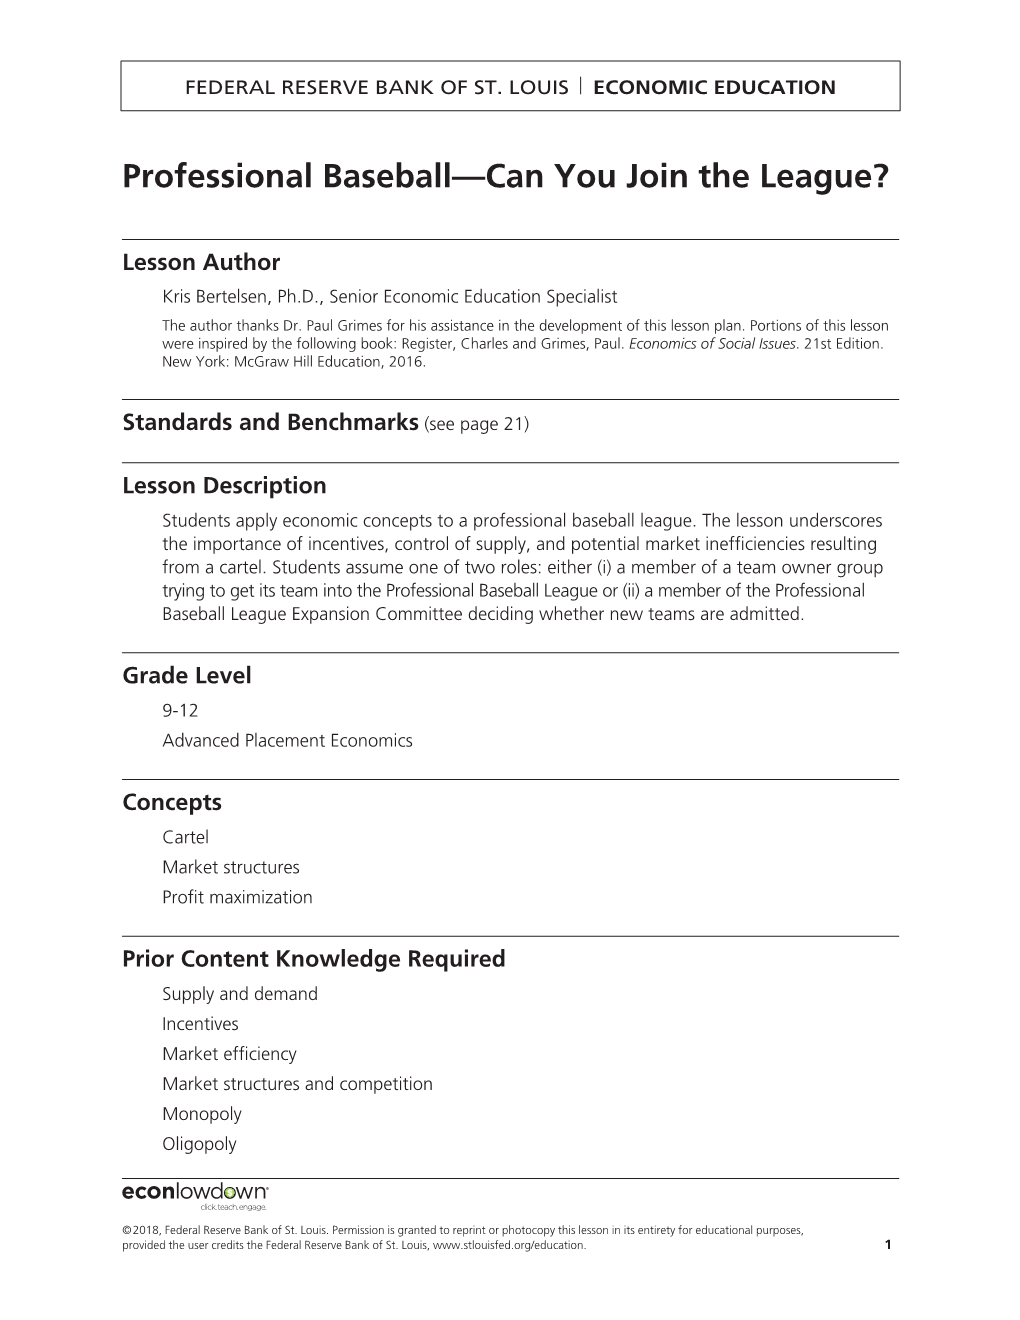 Professional Baseball—Can You Join the League?